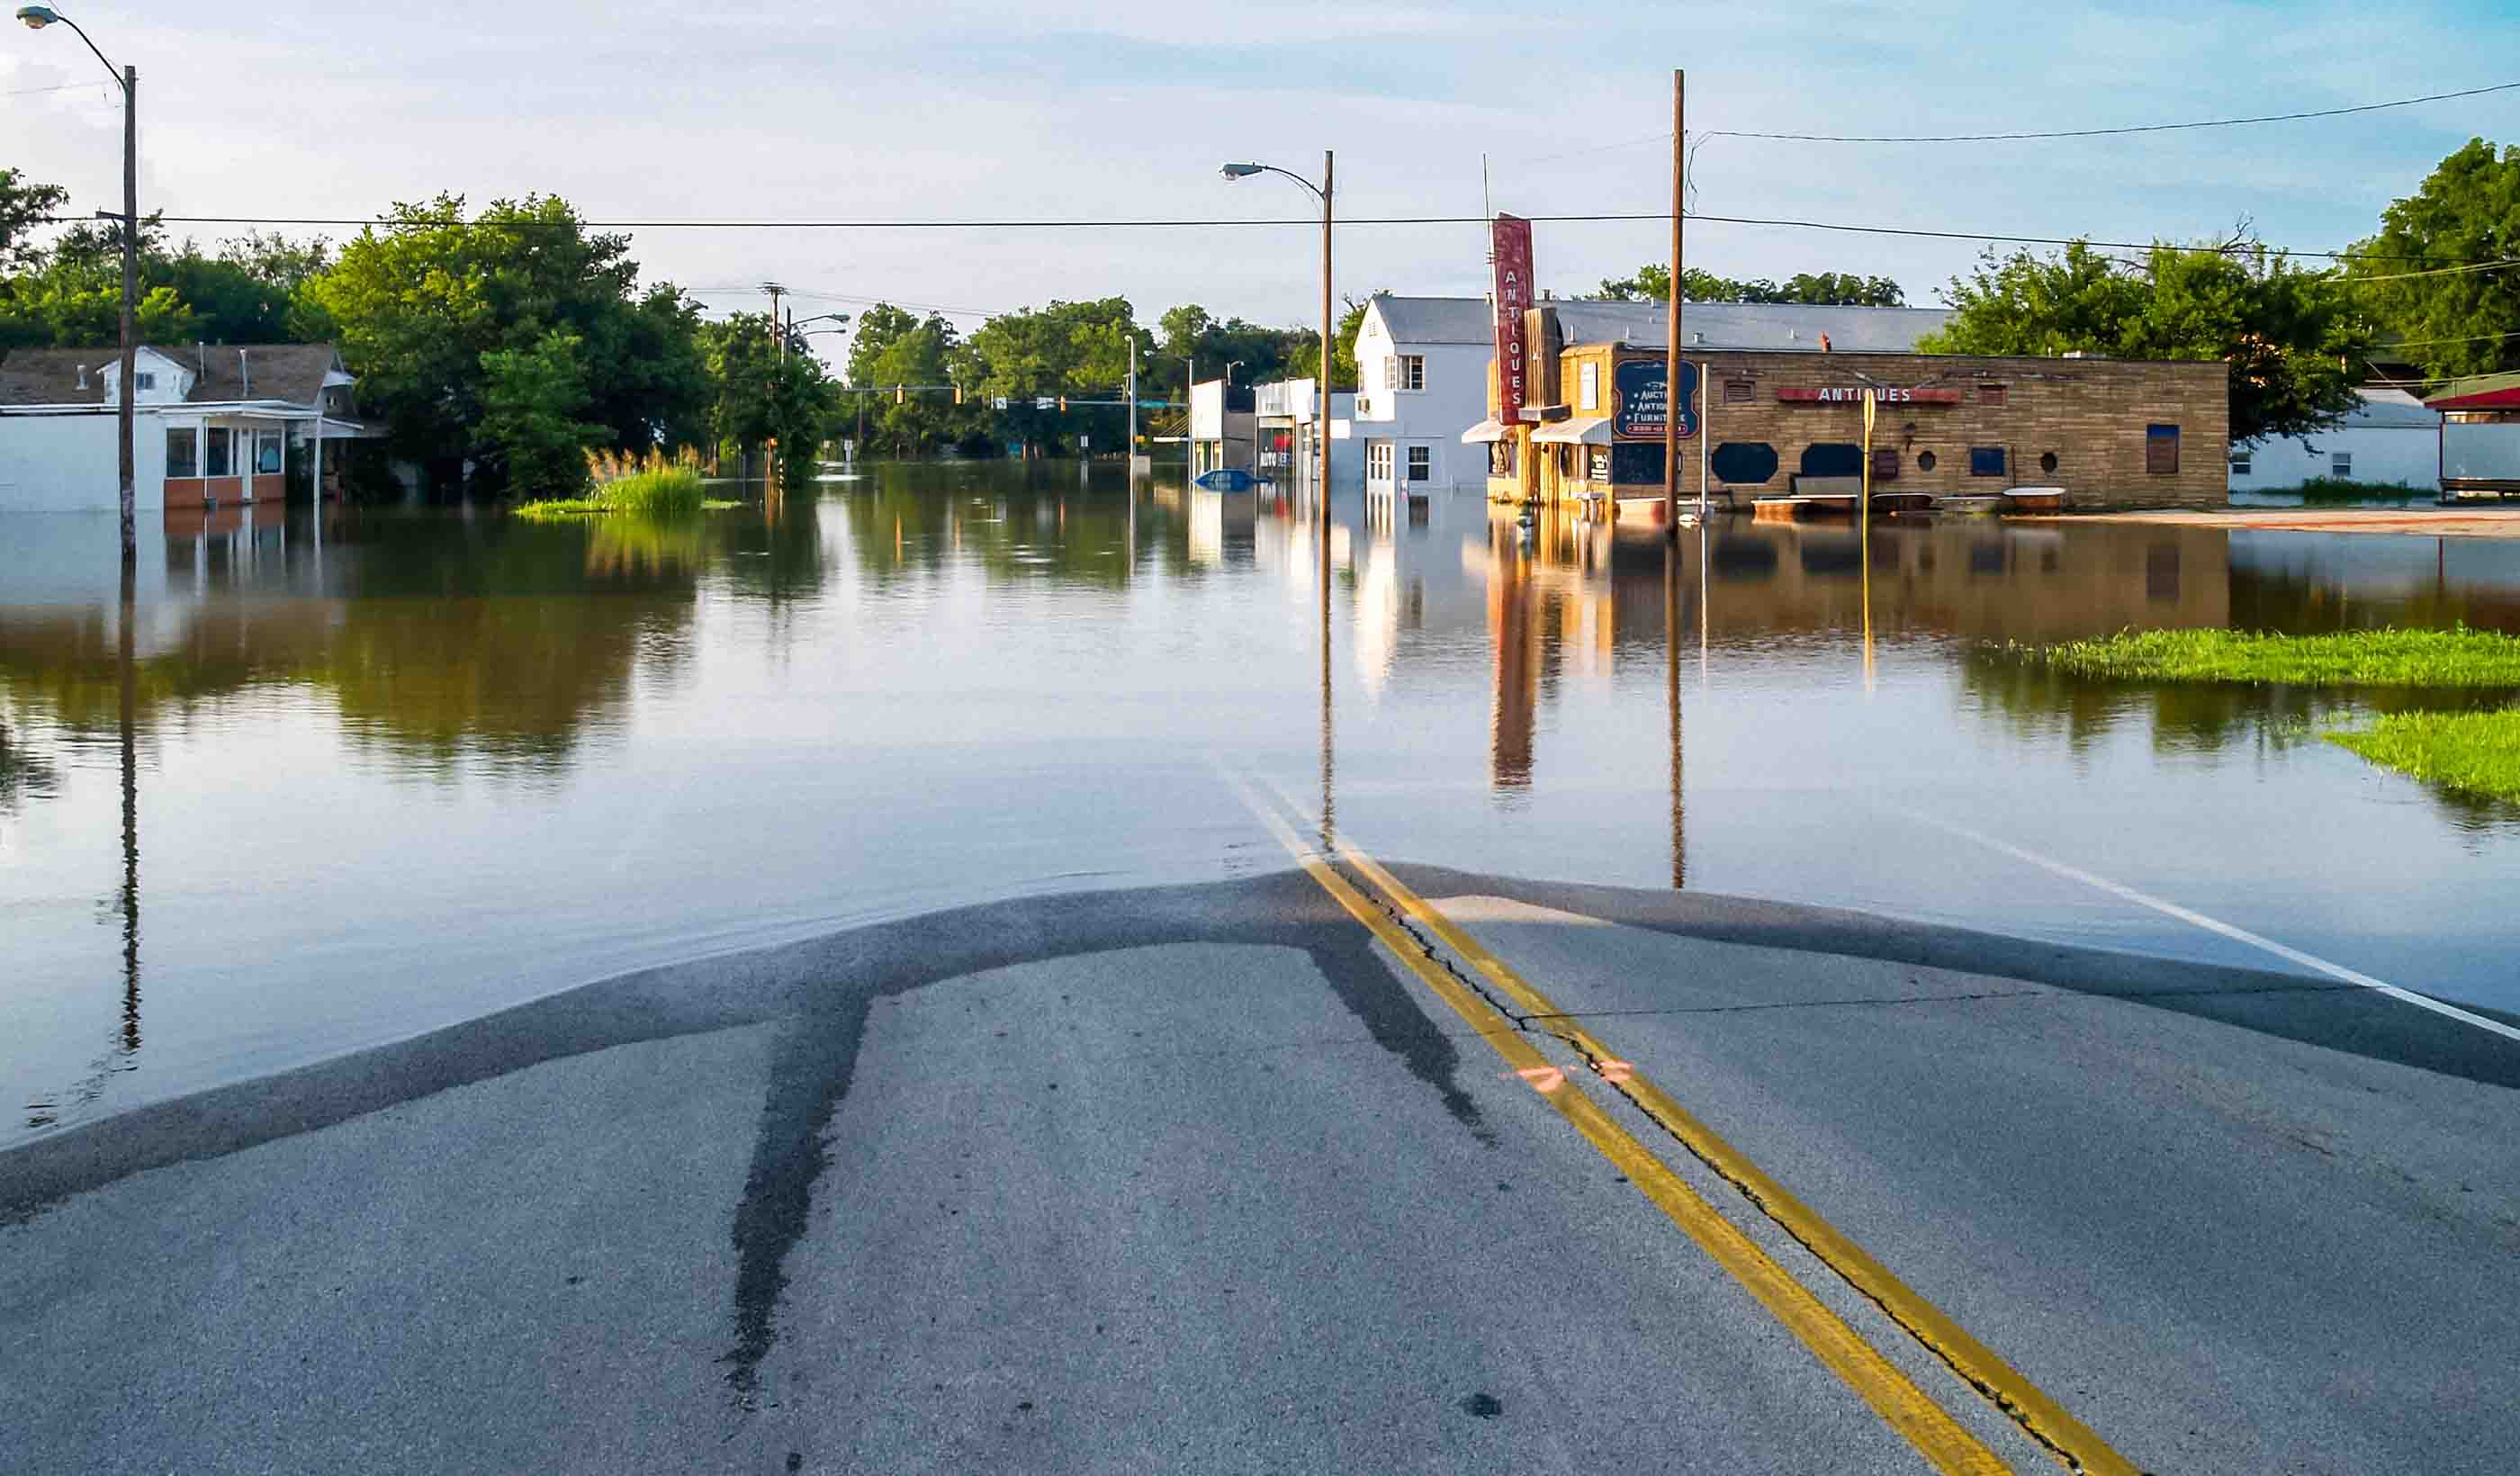 What's the hype around machine learning and AI for flood mitigation?